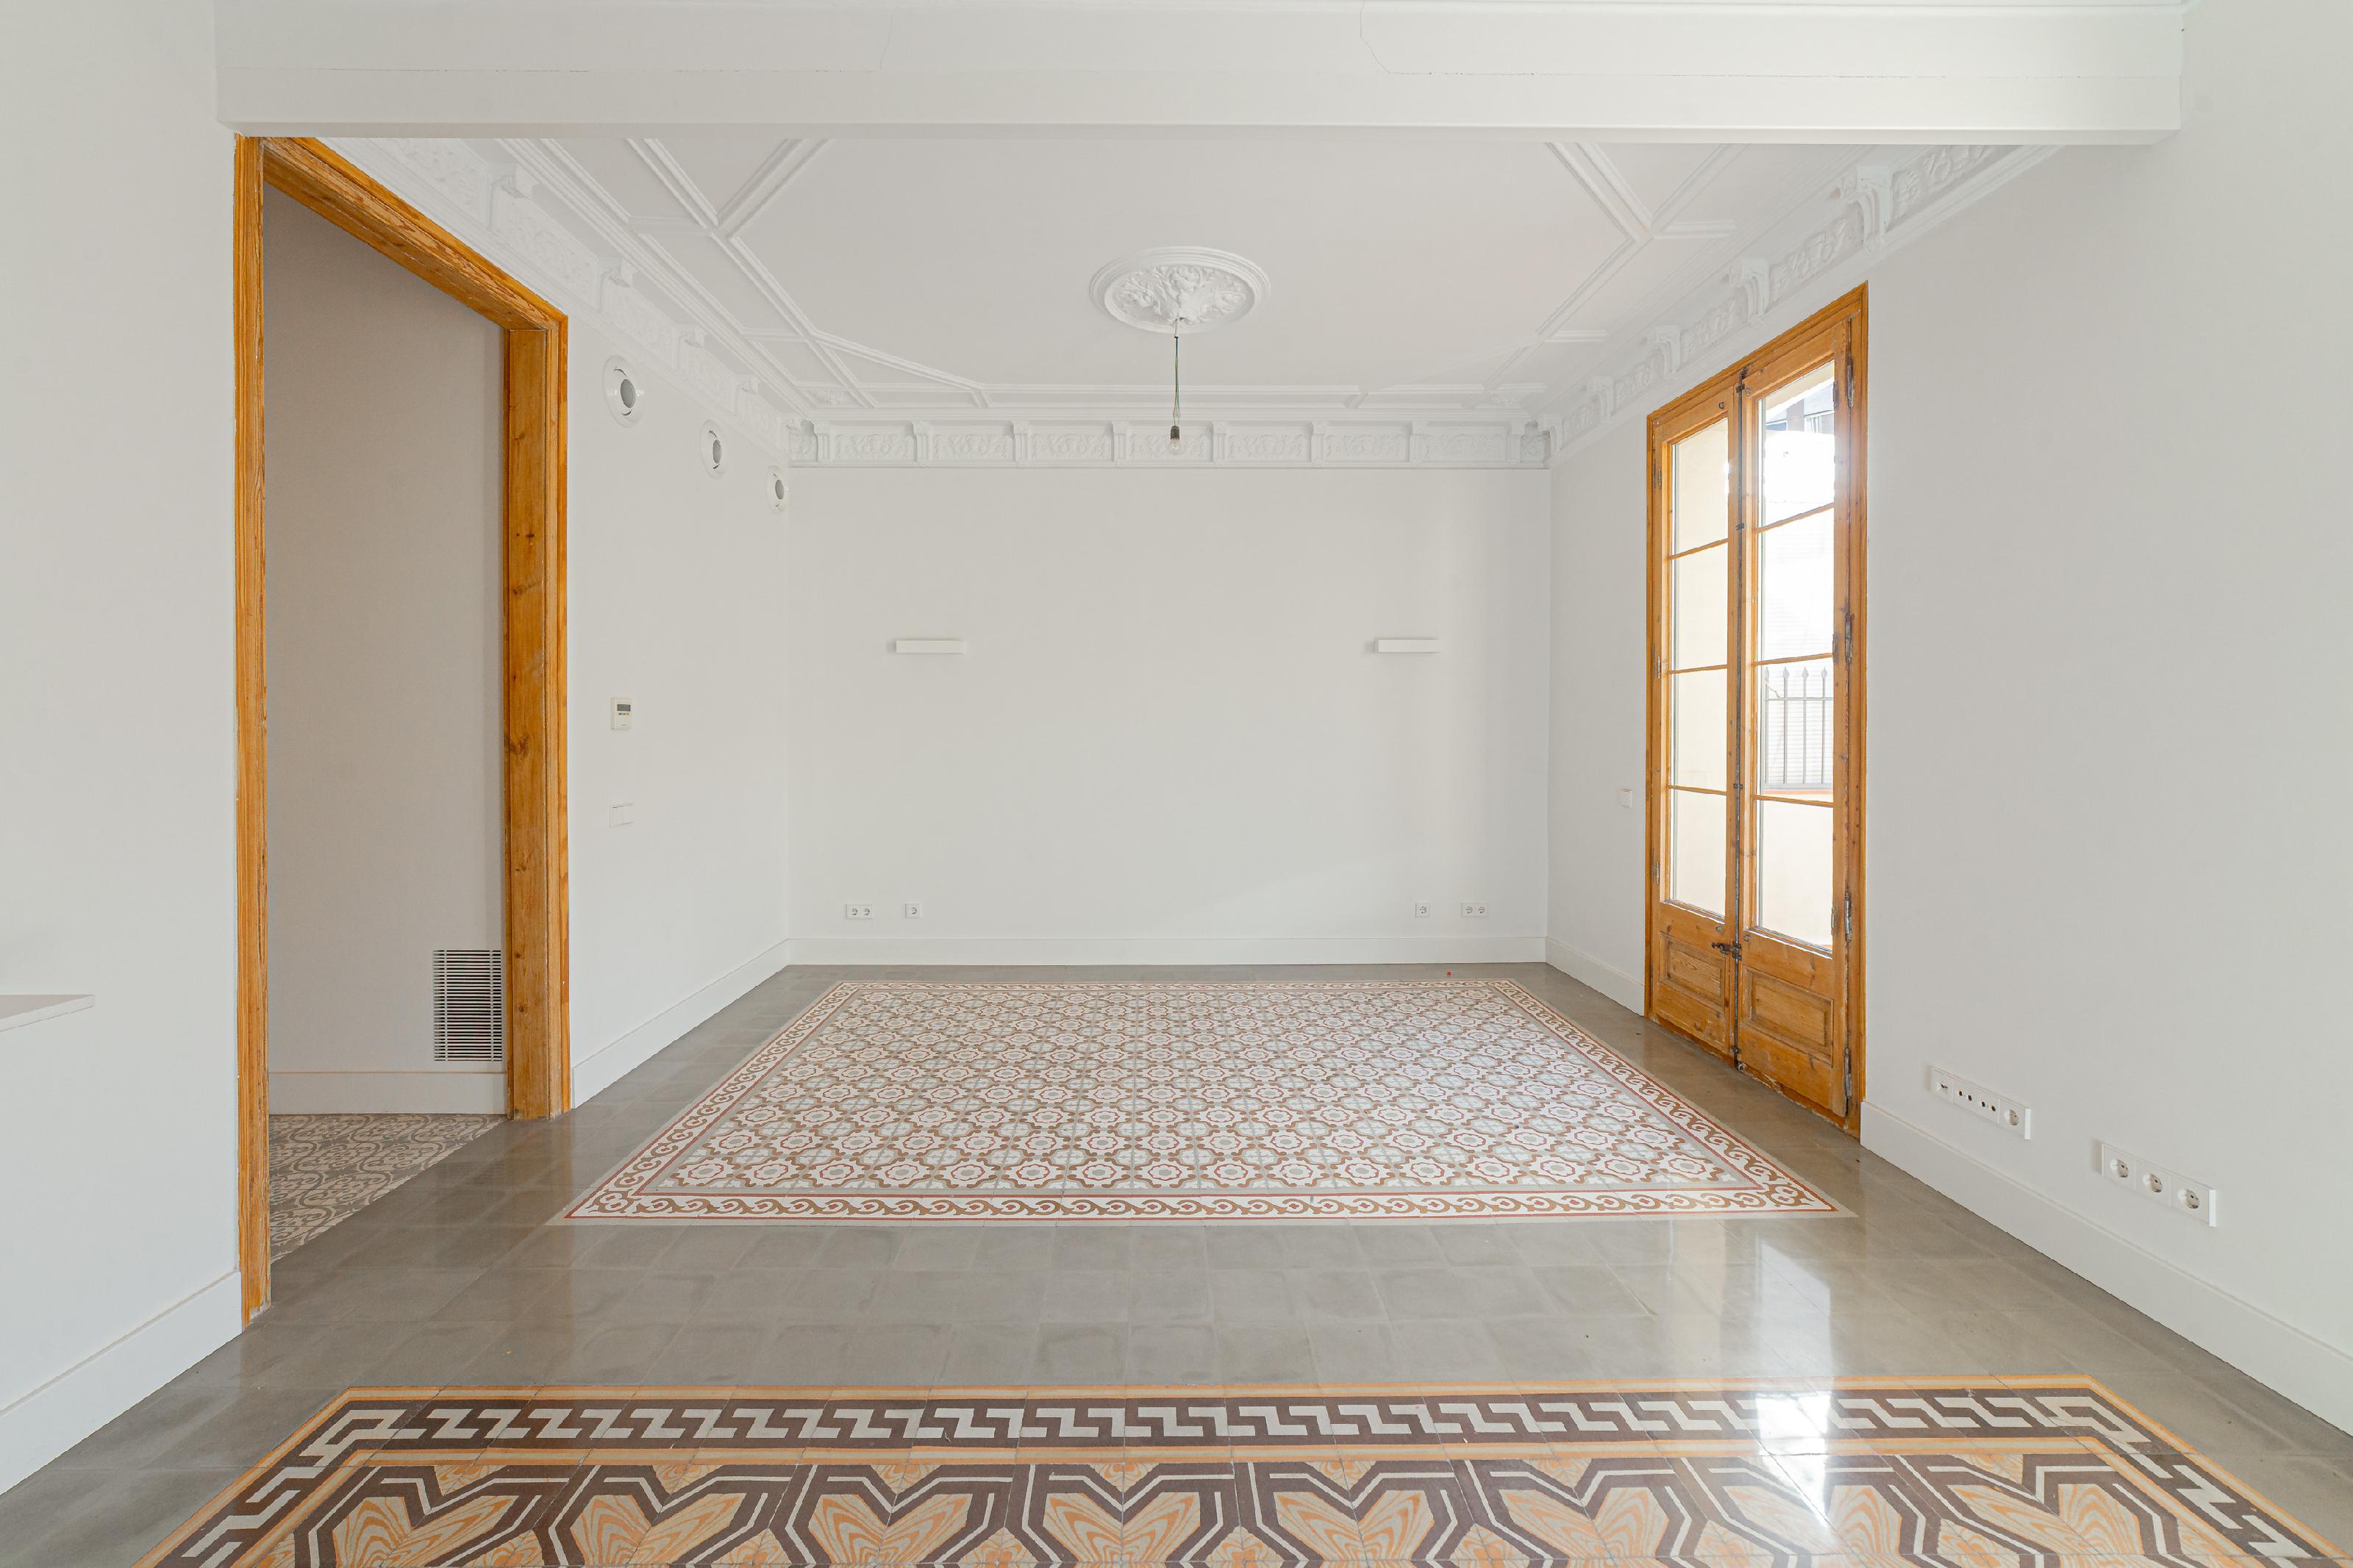 275557 Flat for sale in Eixample, Old Esquerre Eixample 19